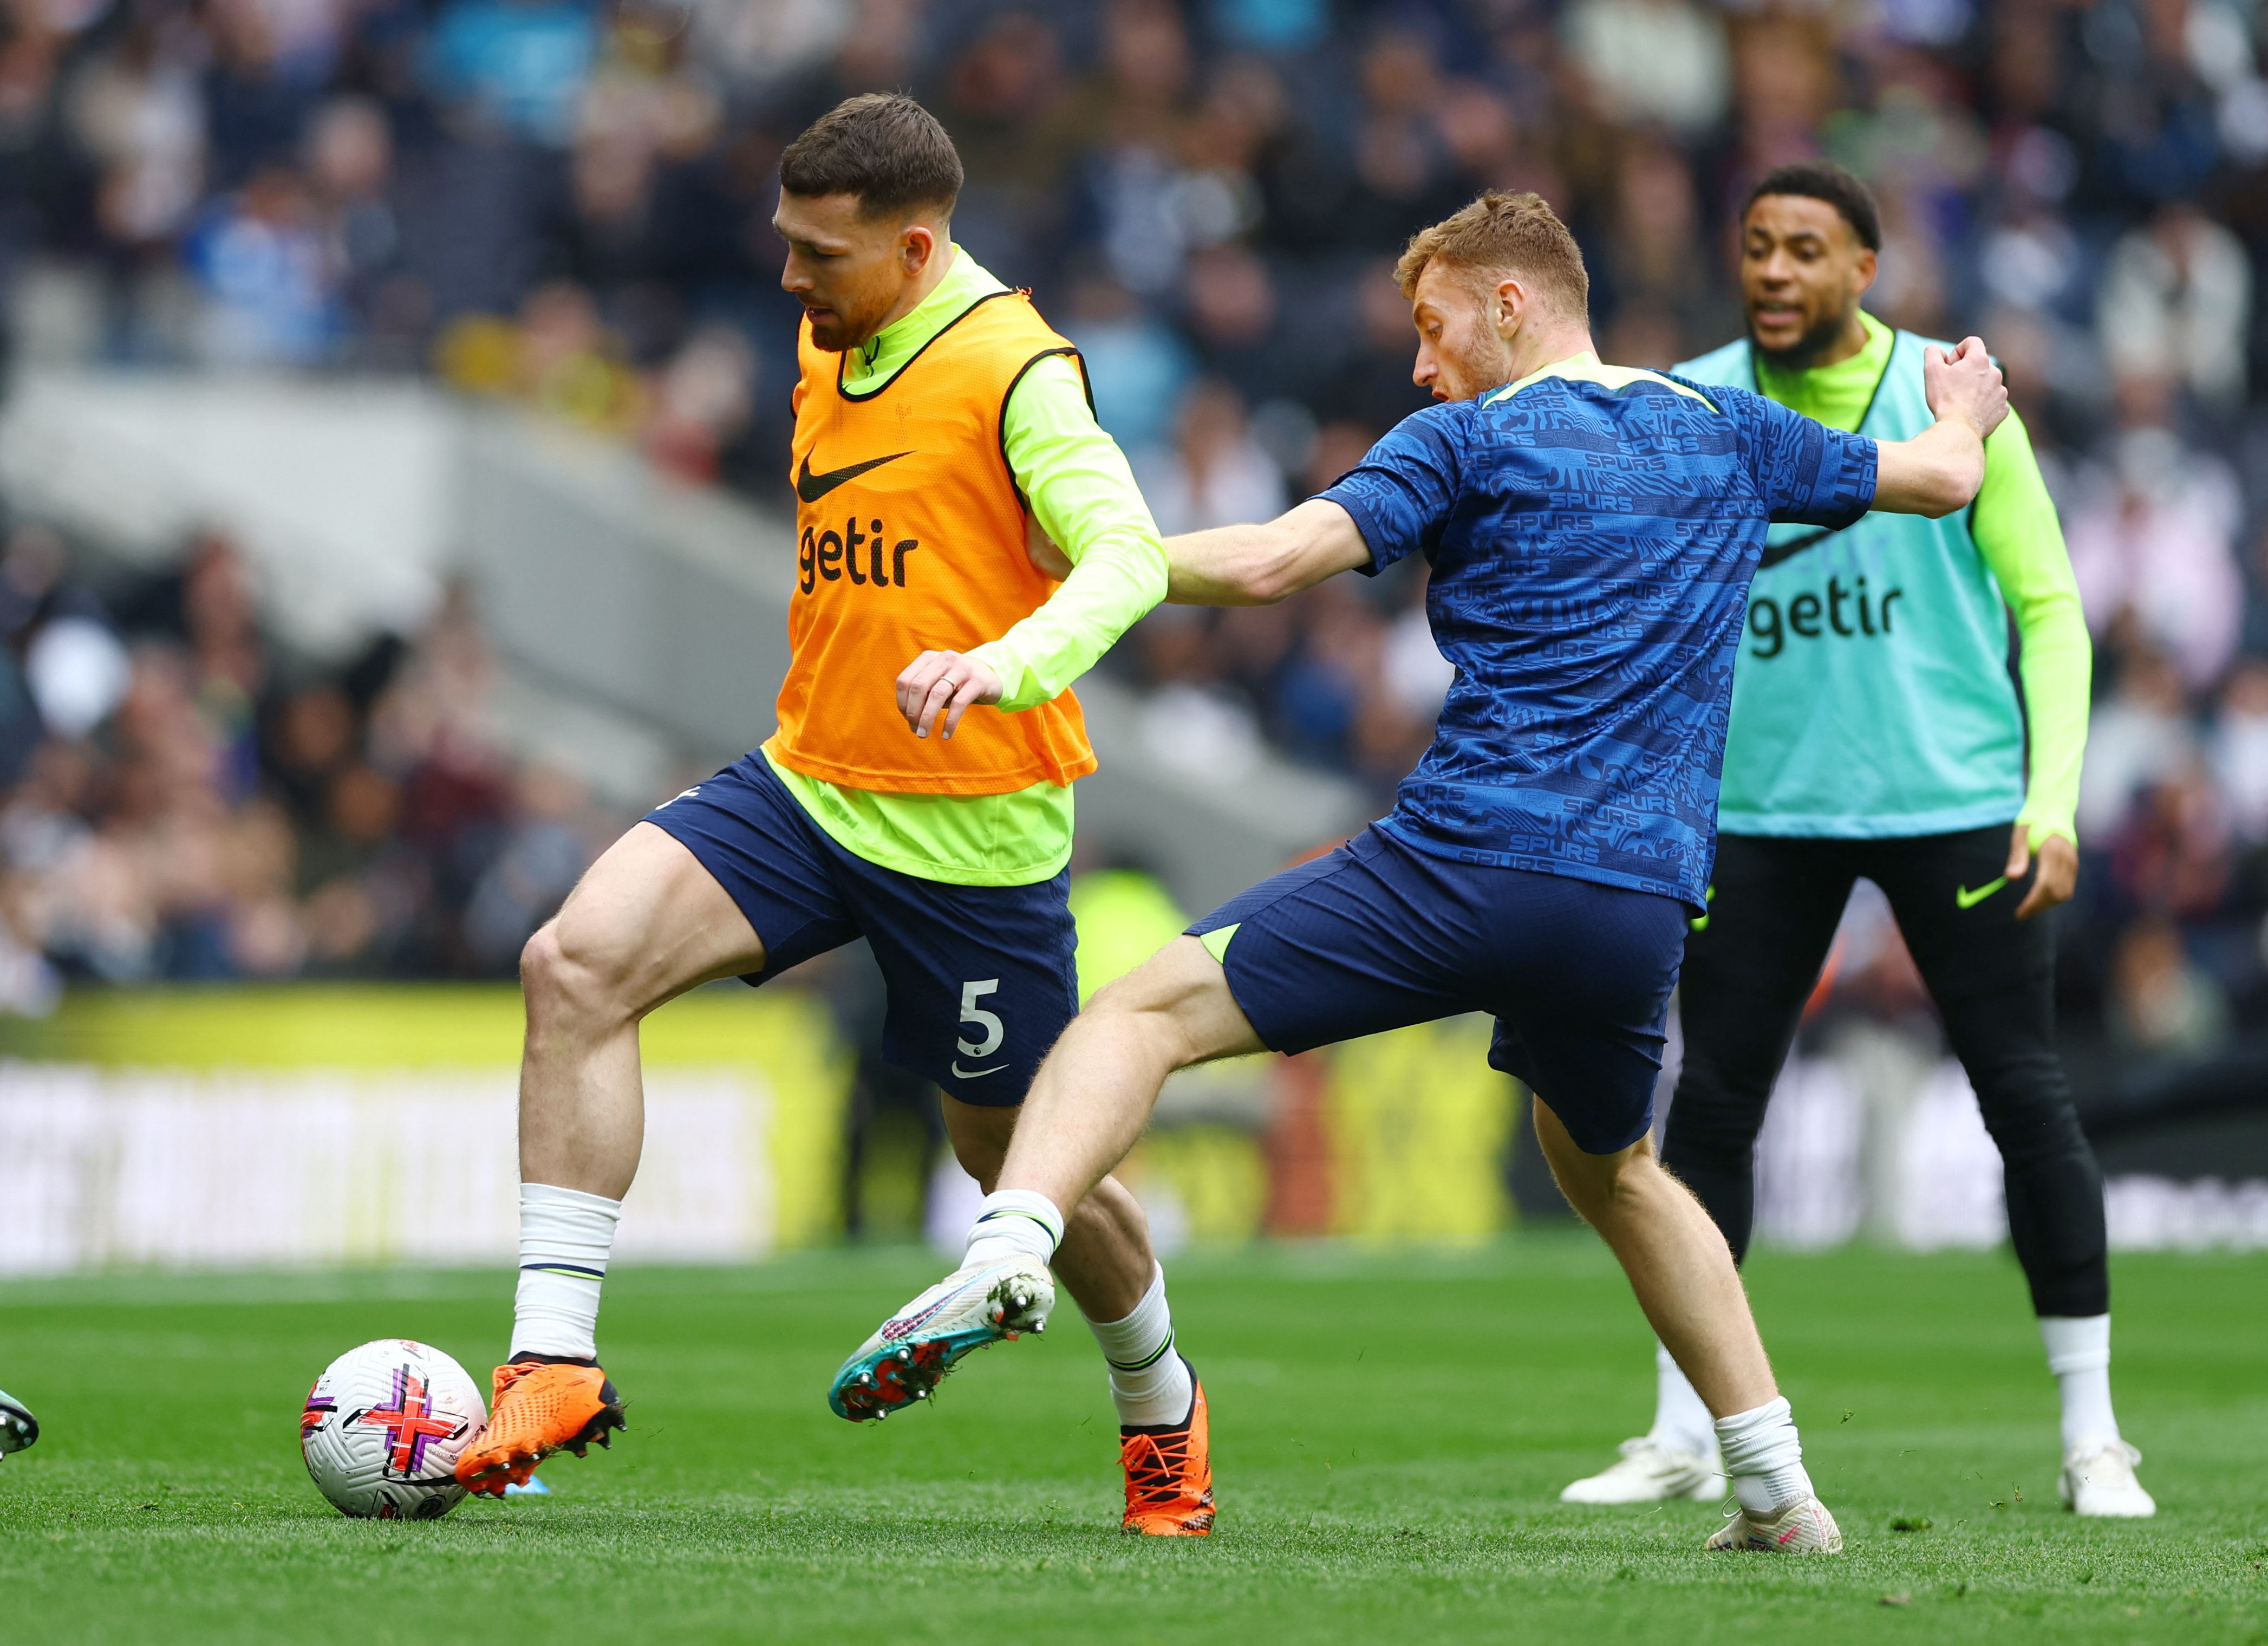 Tottenham Hotspur's Pierre-Emile Hojbjerg and Dejan Kulusevski during the warm up before the match